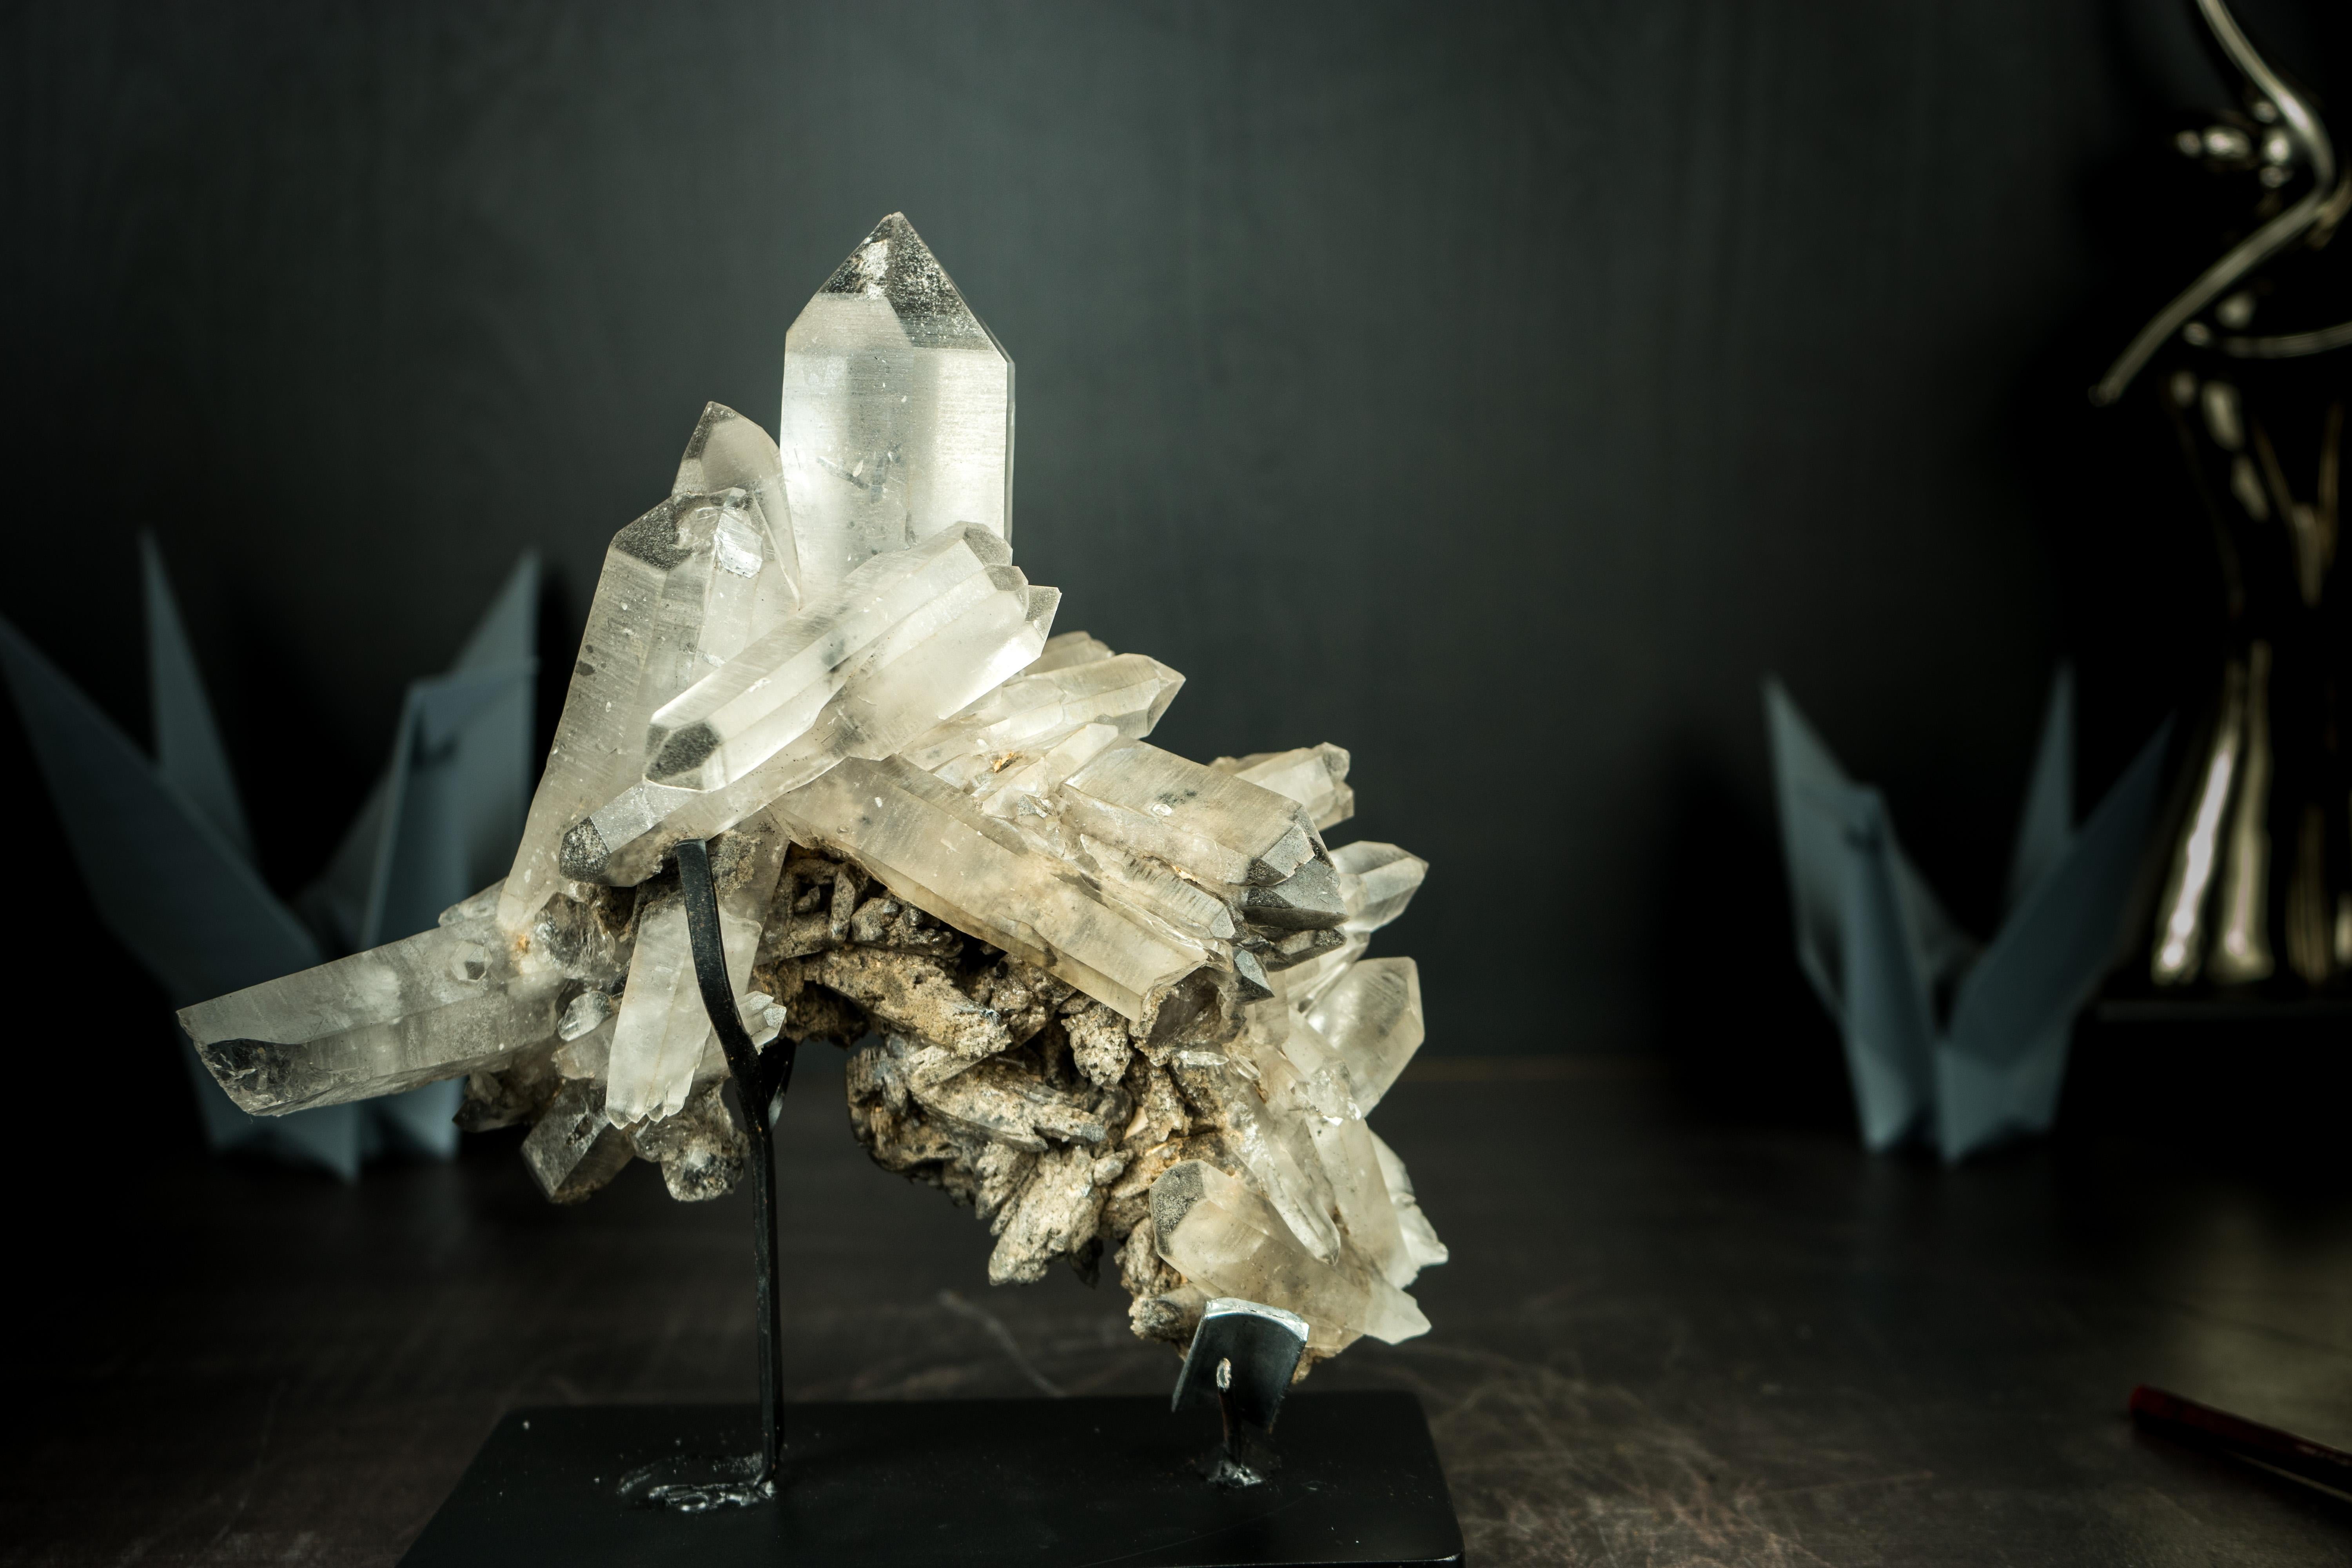 Straight from the famous Araçuaí-Itinga mines, this rare specimen is an all-natural Lemurian with a Lithium Crystal Cluster, bringing beautiful aesthetics as well as the energy of two exceptional crystal varieties in one remarkable piece. It is